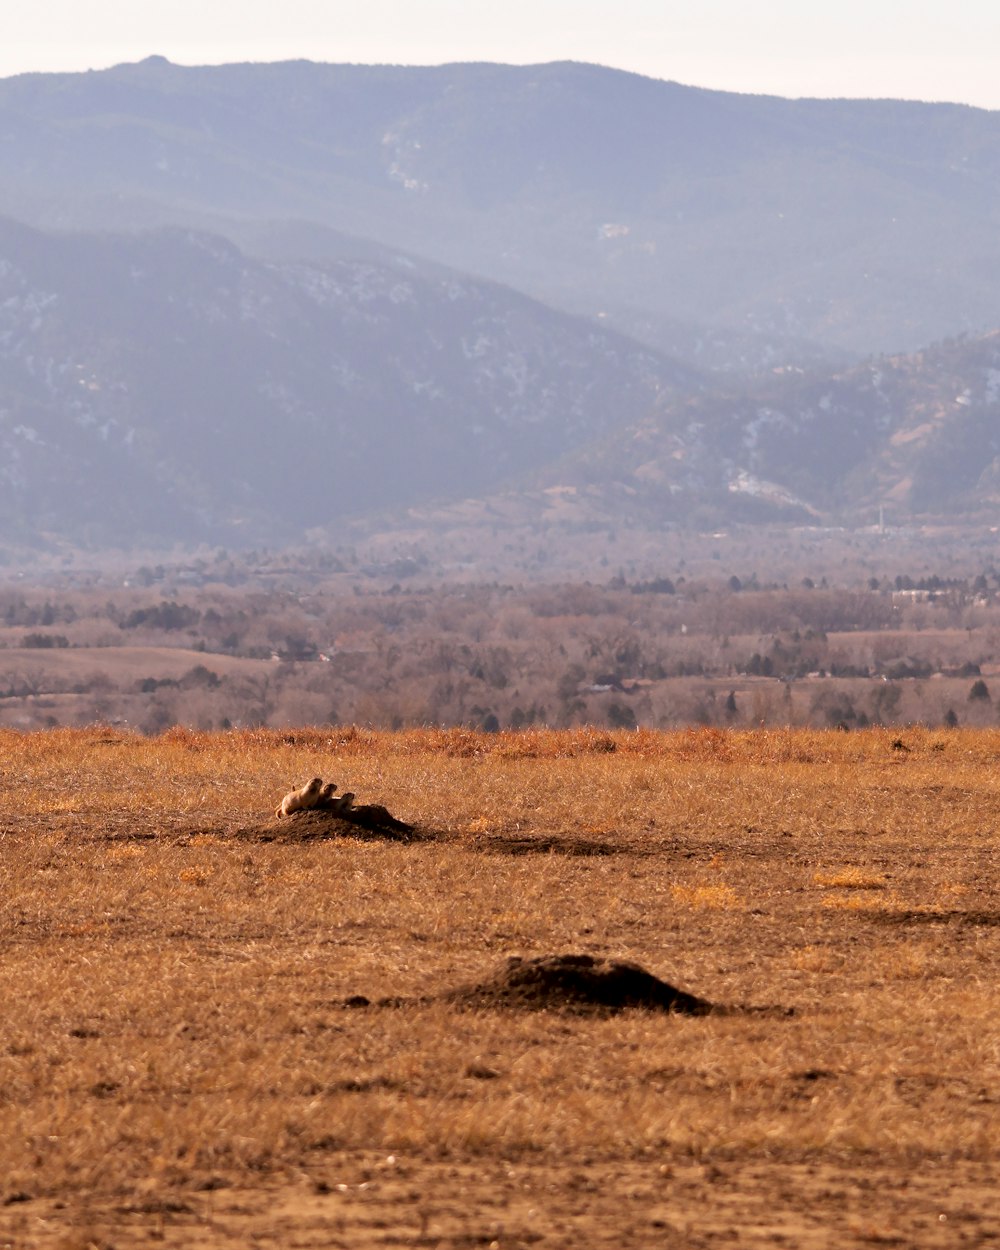 a lone giraffe standing in a field with mountains in the background